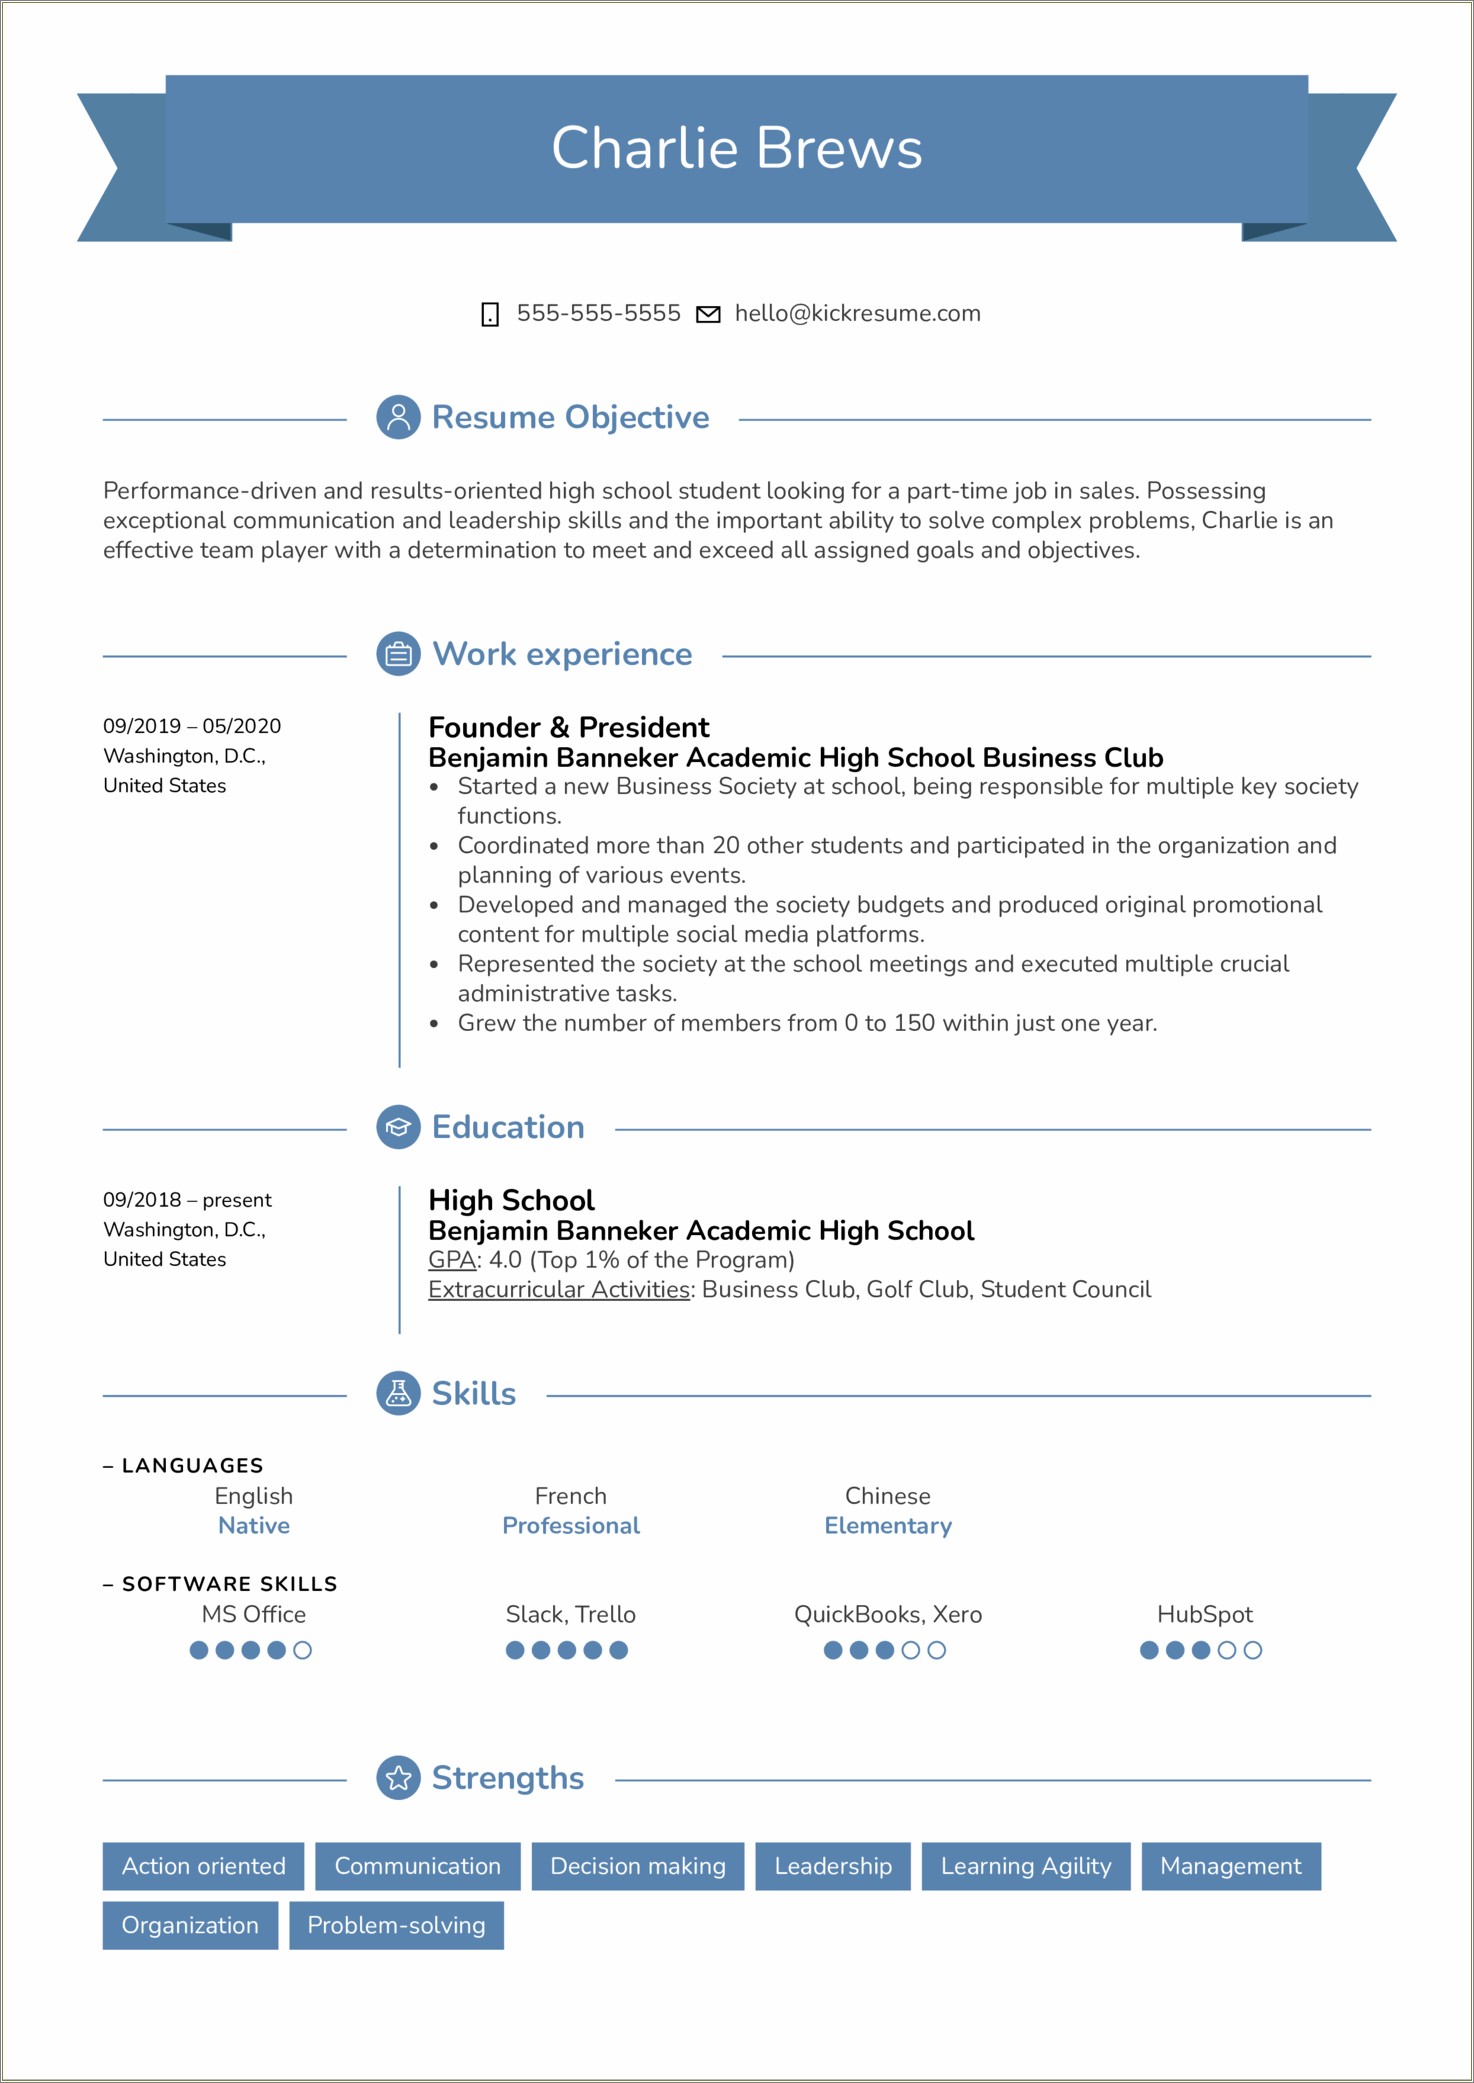 resumes-to-apply-for-jobs-resume-example-gallery